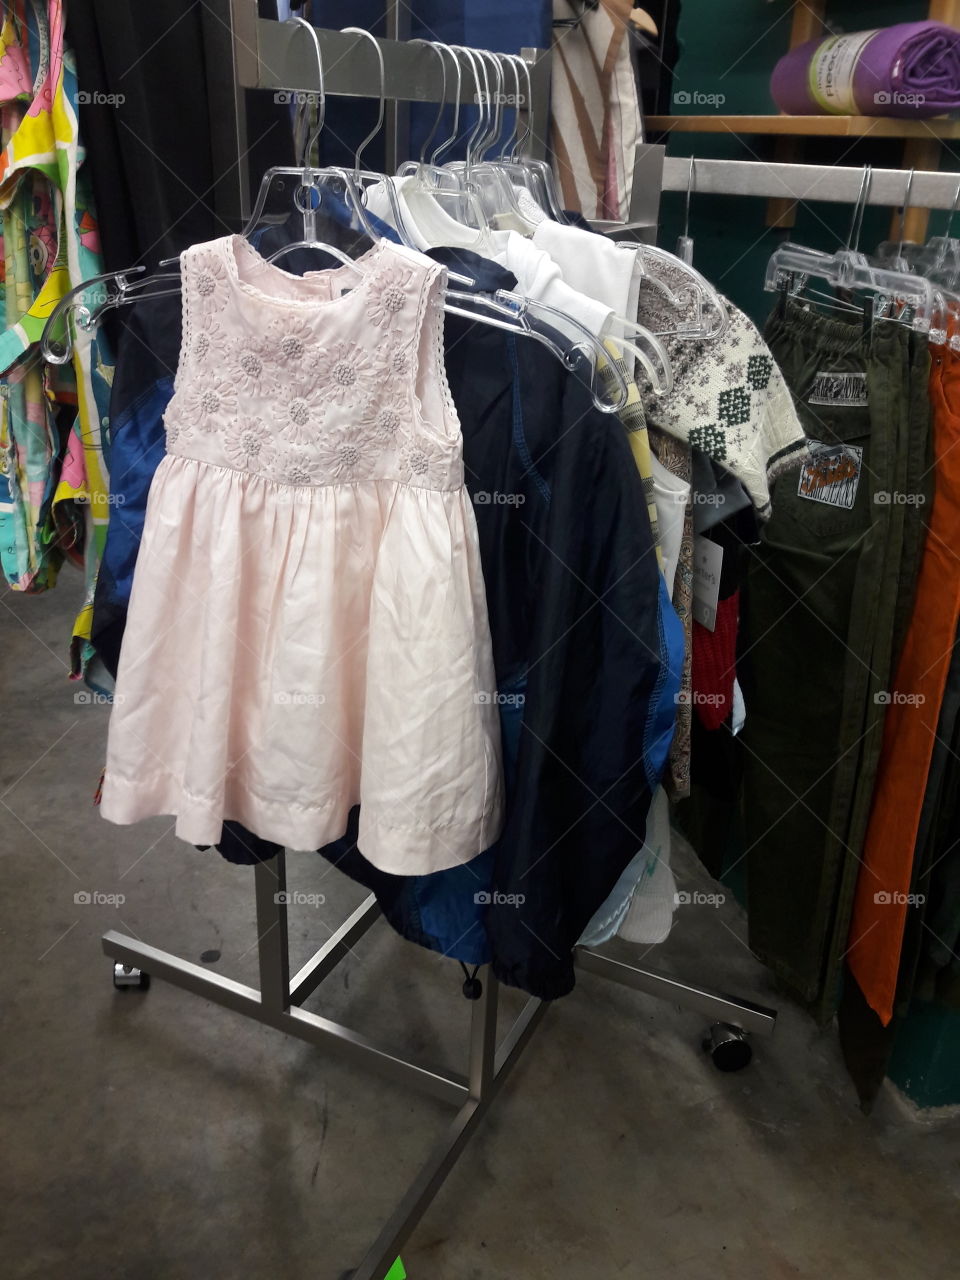 Clothing rack at the thrift shop.